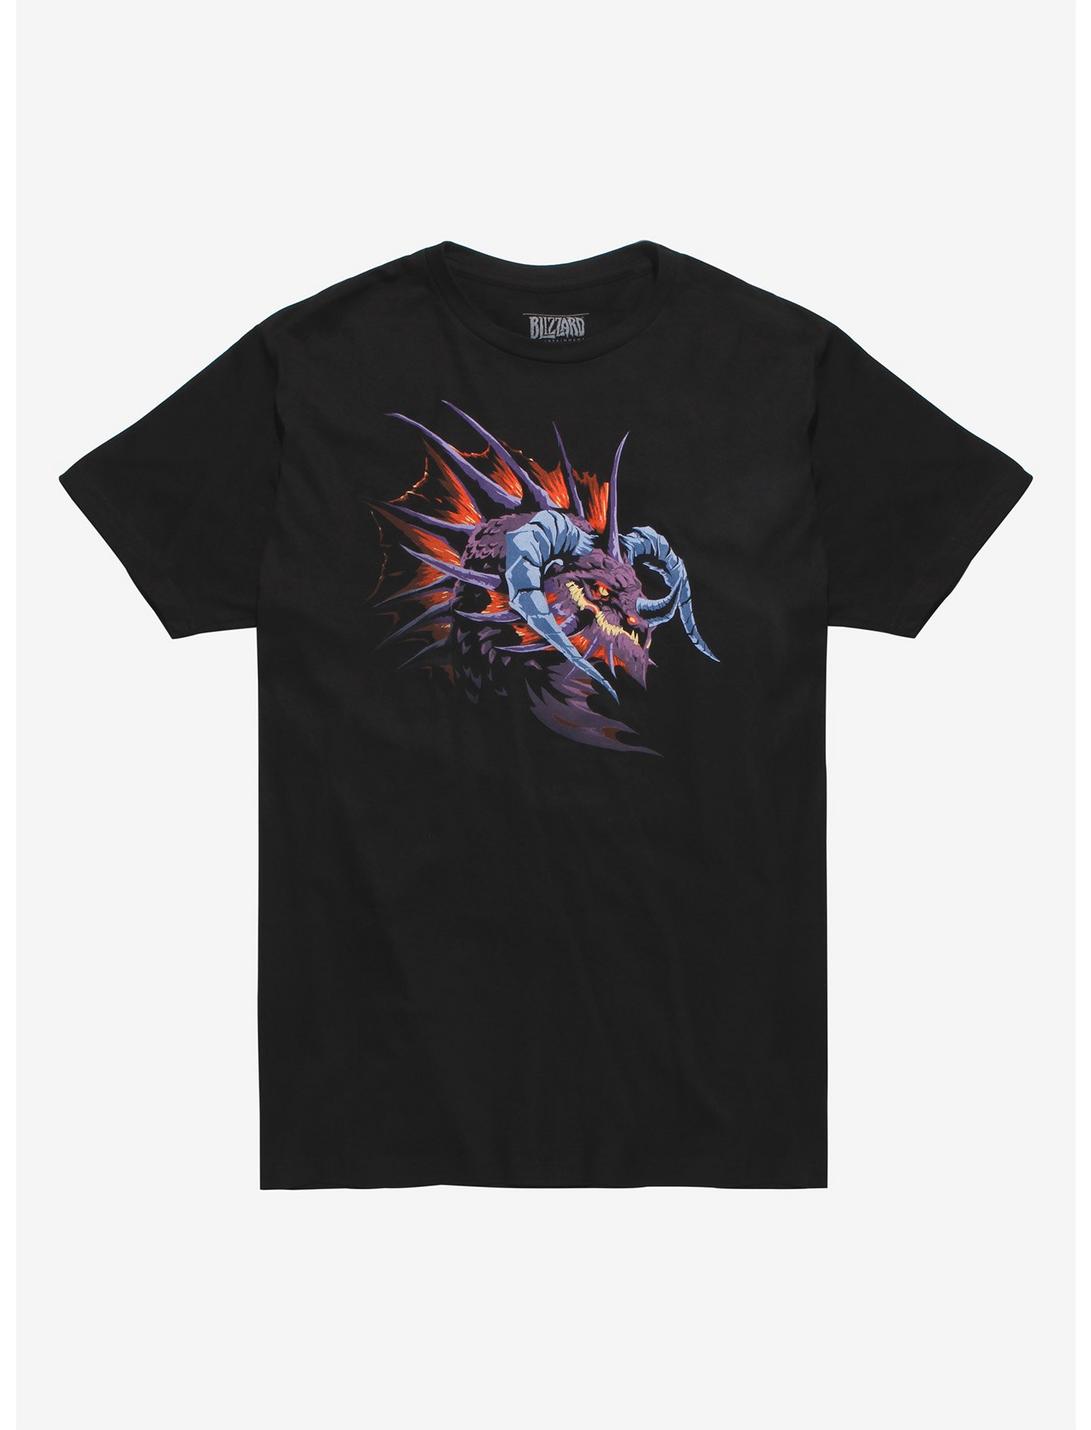 World Of Warcraft Onyxia Broodmother T-Shirt, BLACK, hi-res